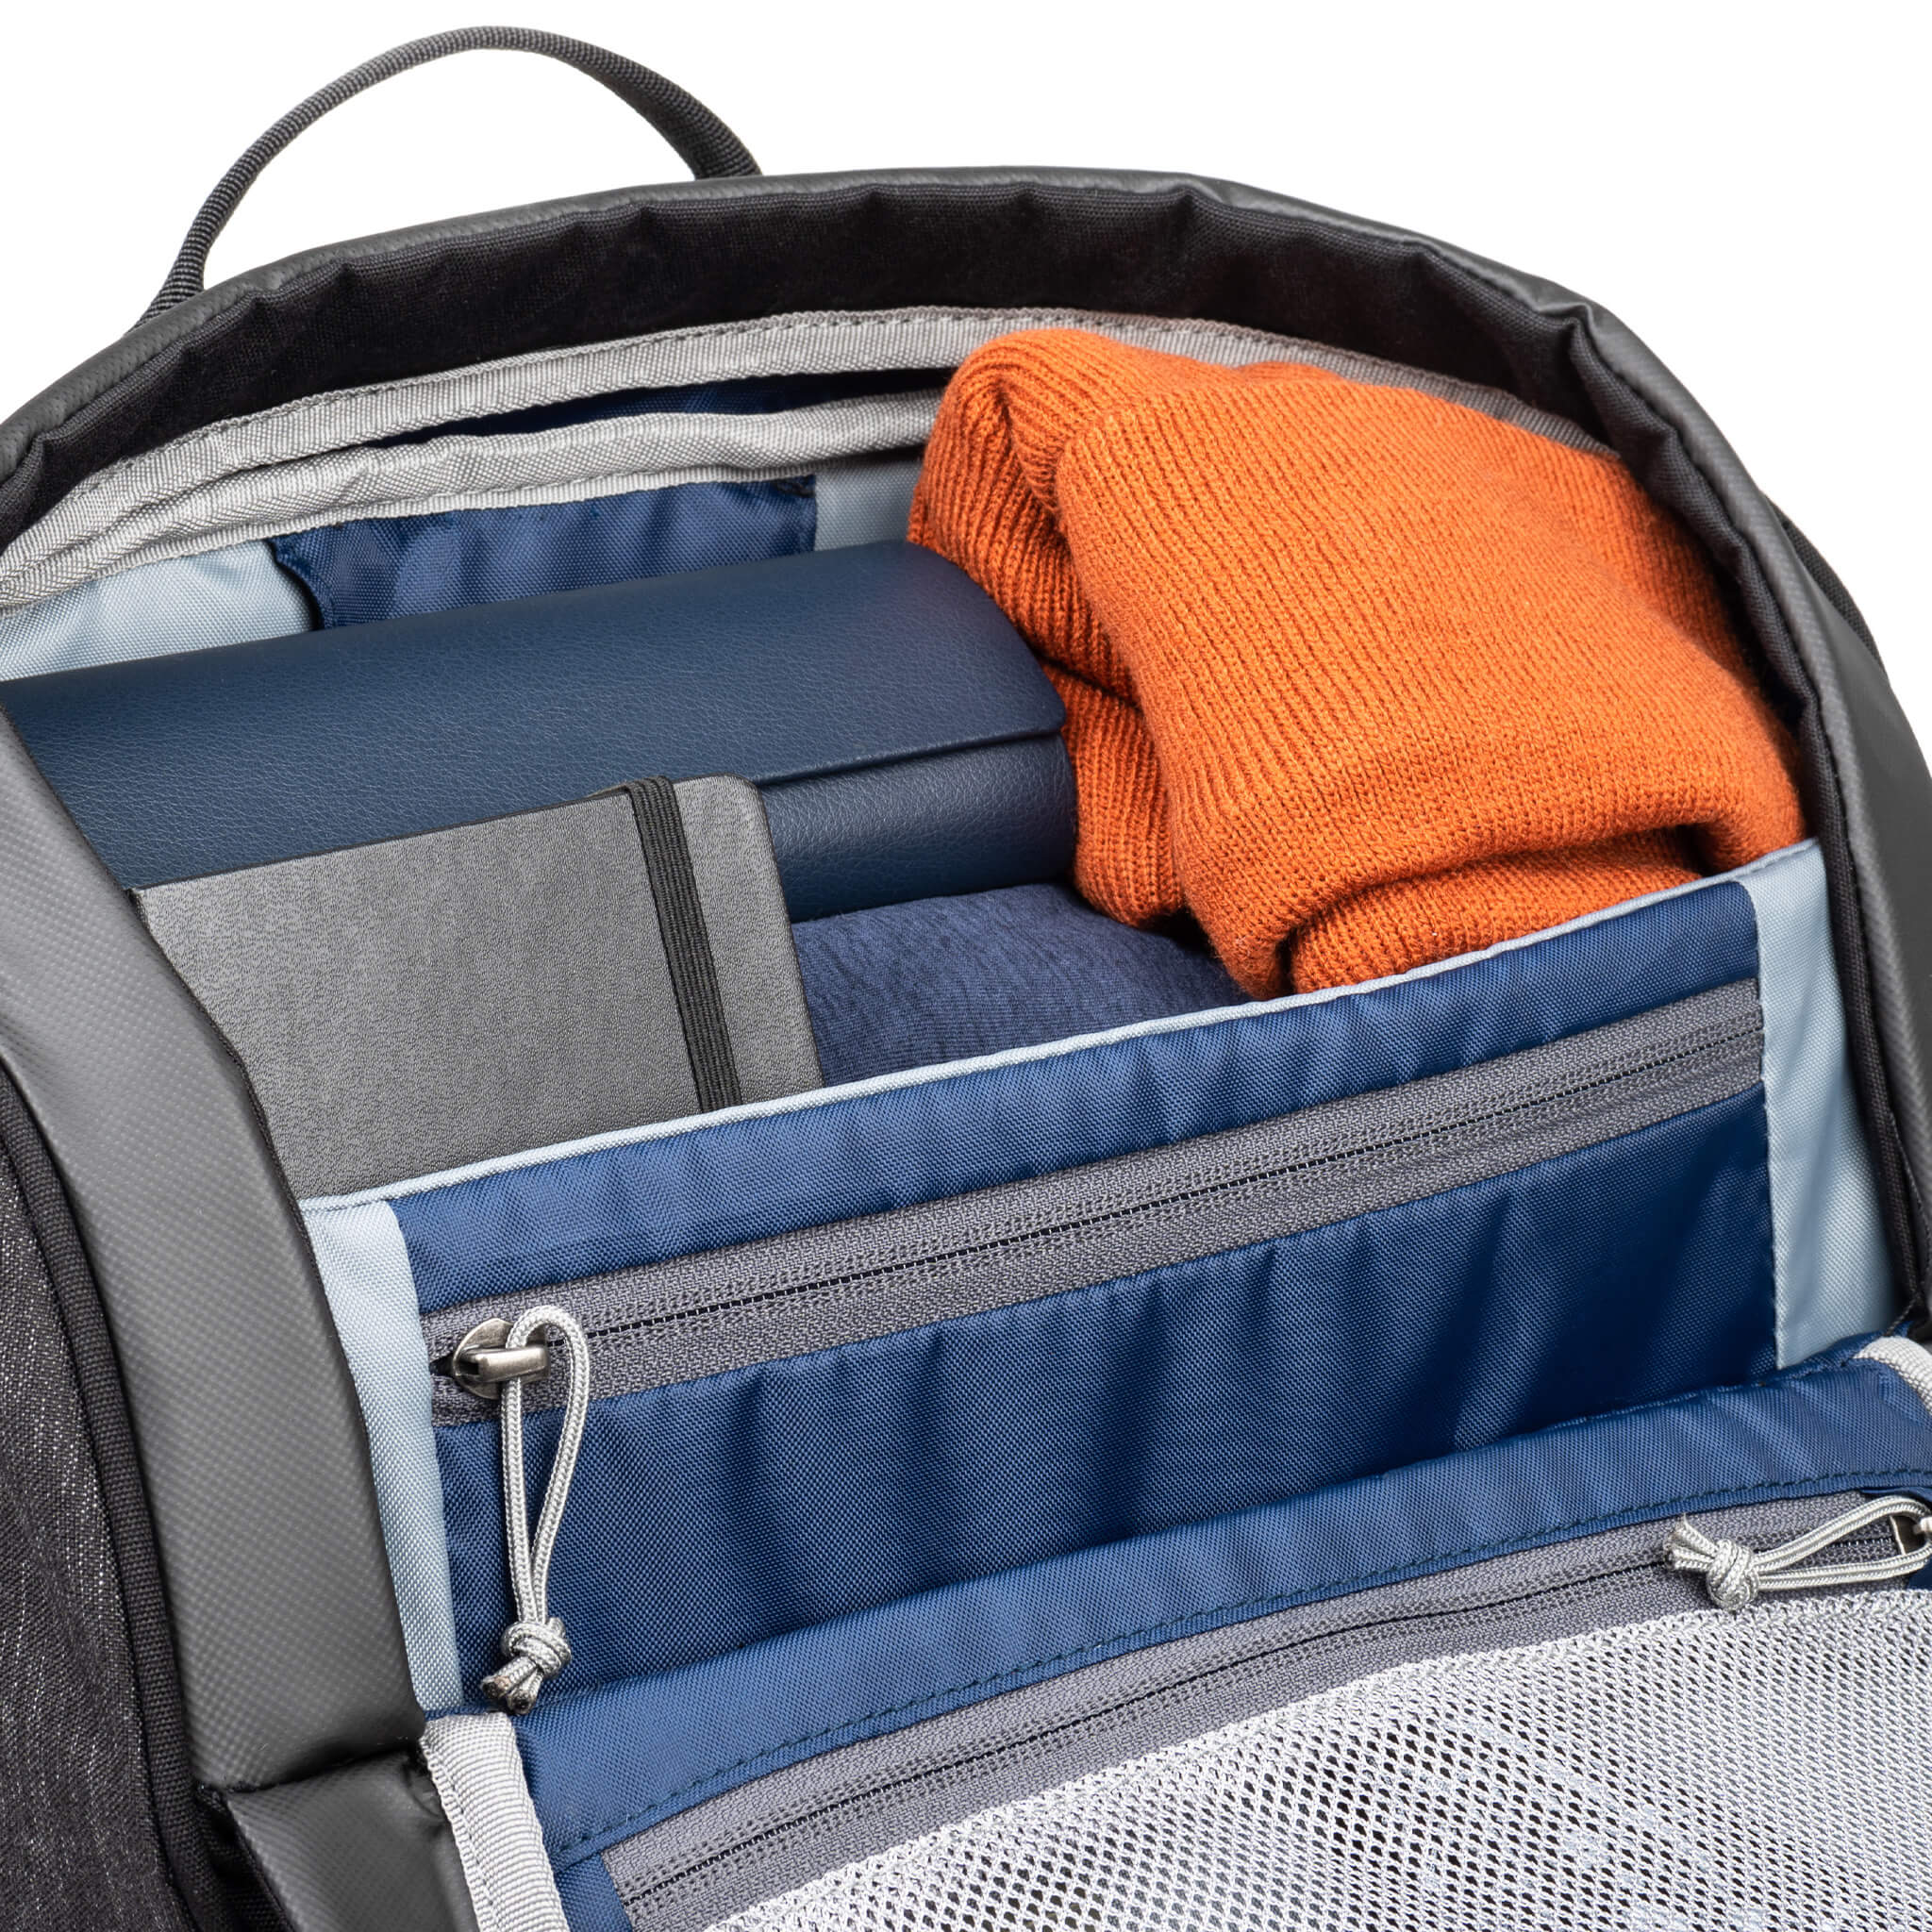 Top compartment keeps essential items easily in reach